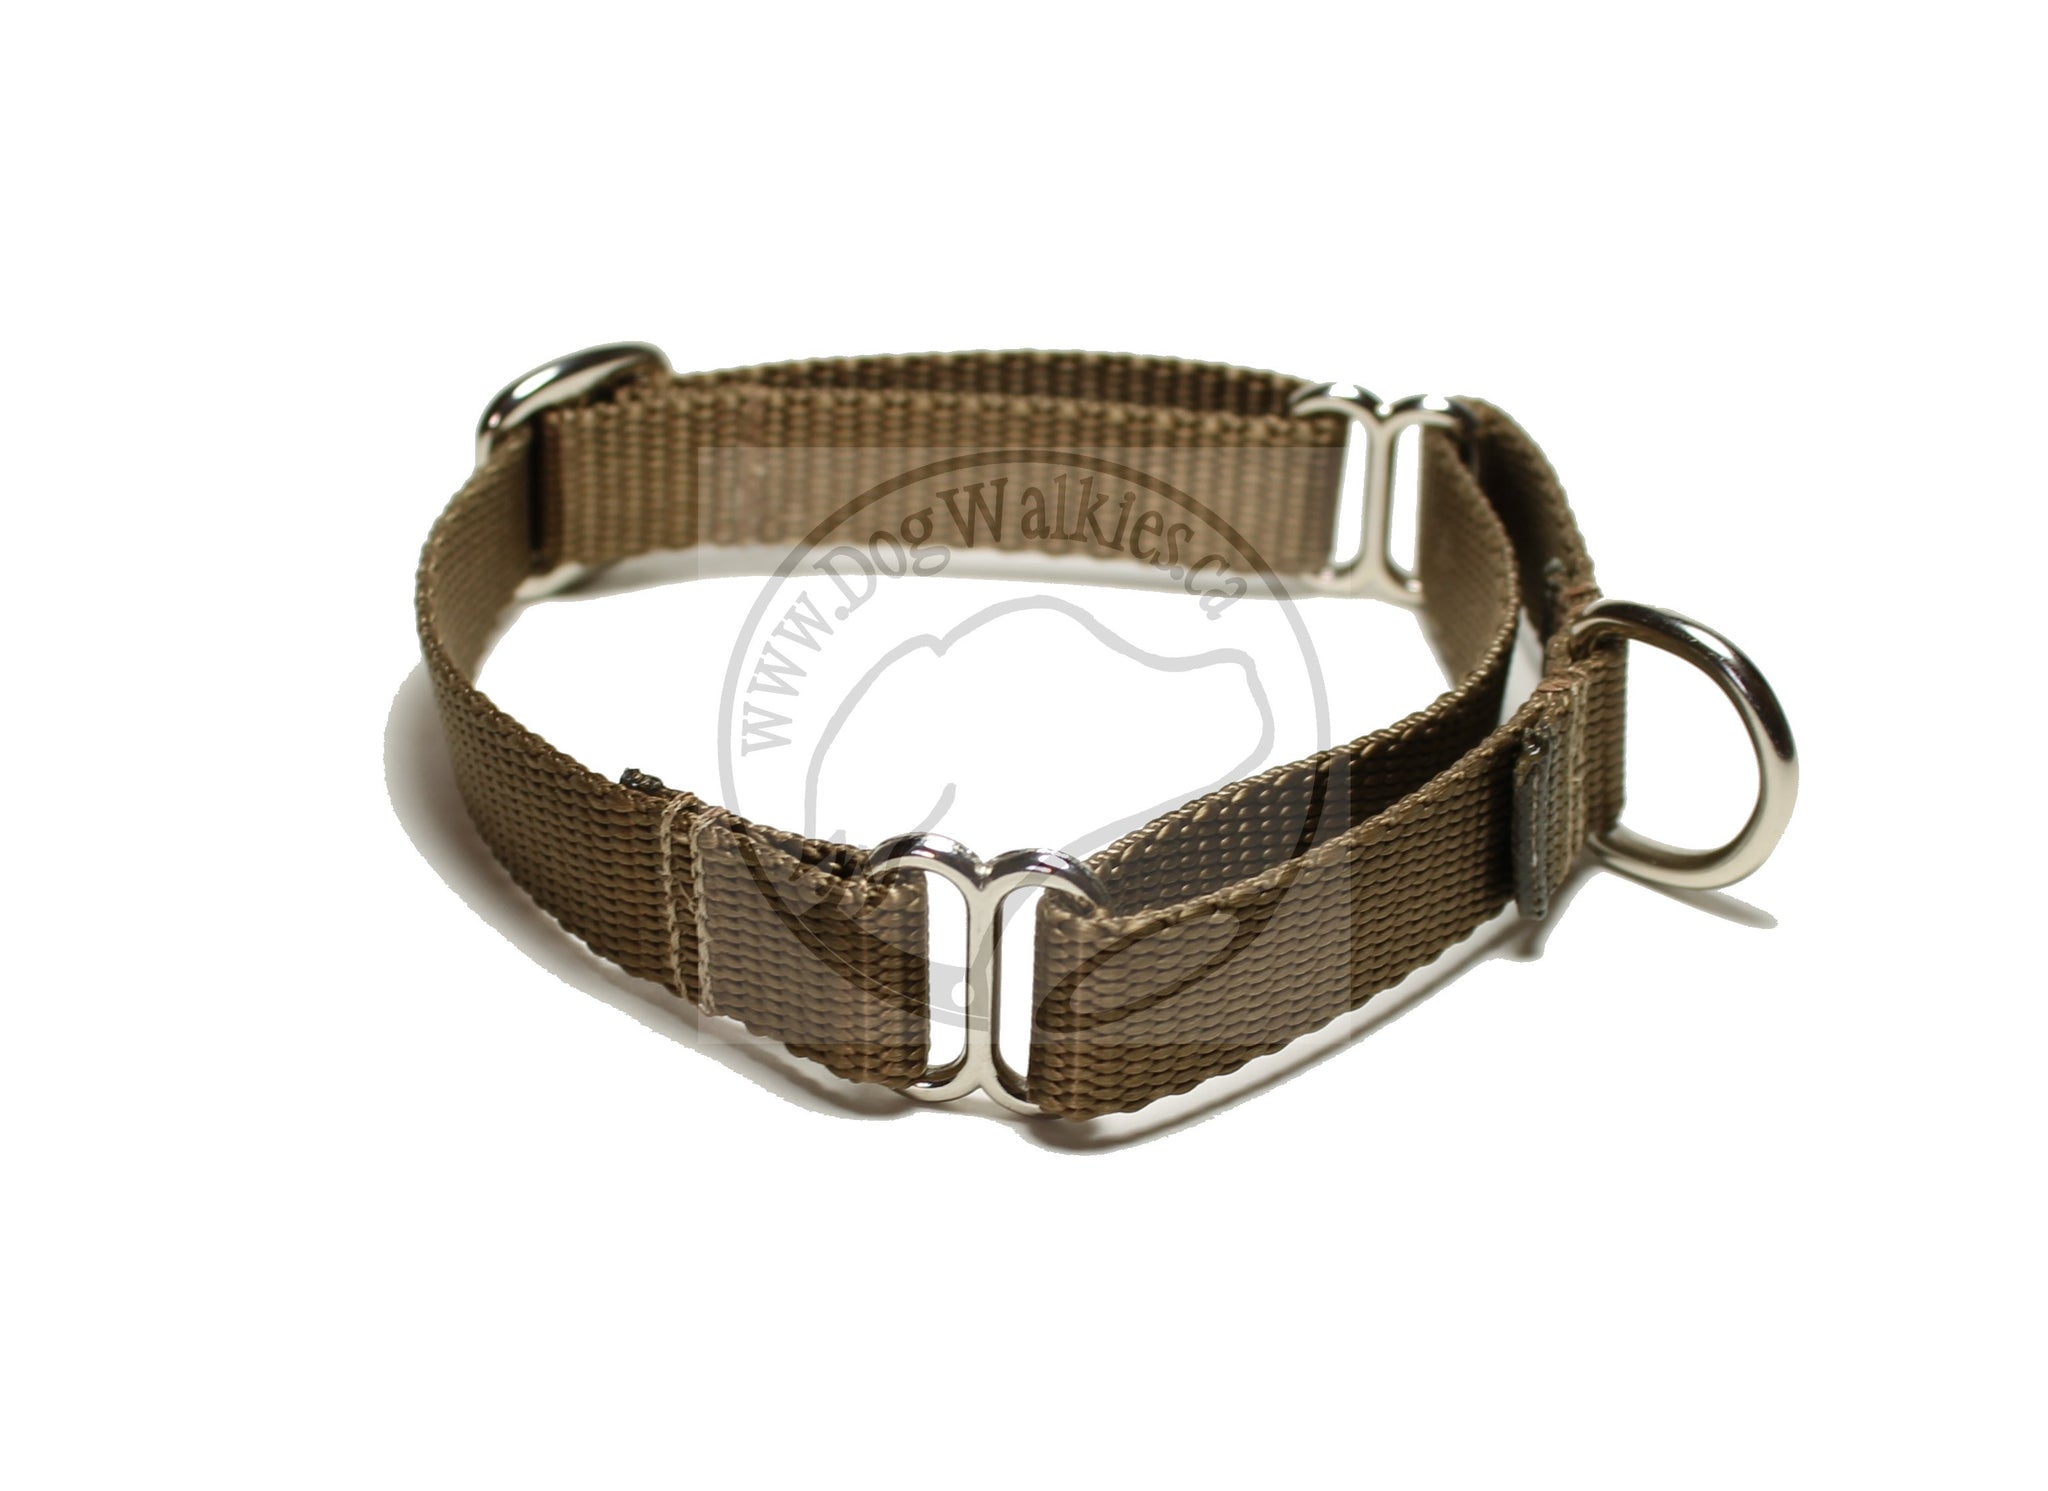 Martingale Dog Collar 3/4" (19mm) wide; Simple - Elegant - Strong